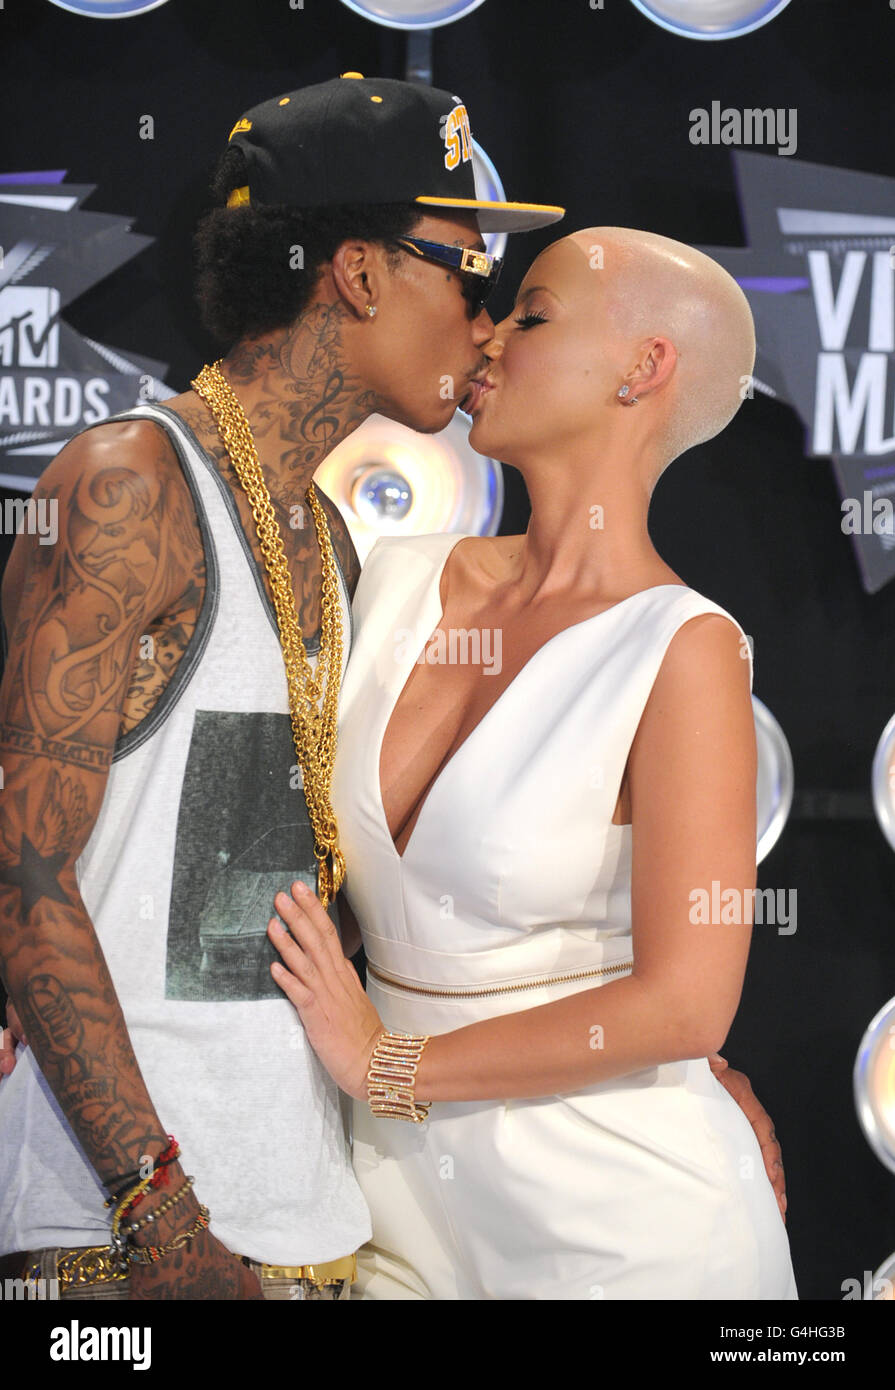 Amber Rose and Wiz Khalifa arrive at the MTV Video Music Awards 2011 at Nokia Theatre L.A. LIVE in Los Angeles, USA. Stock Photo